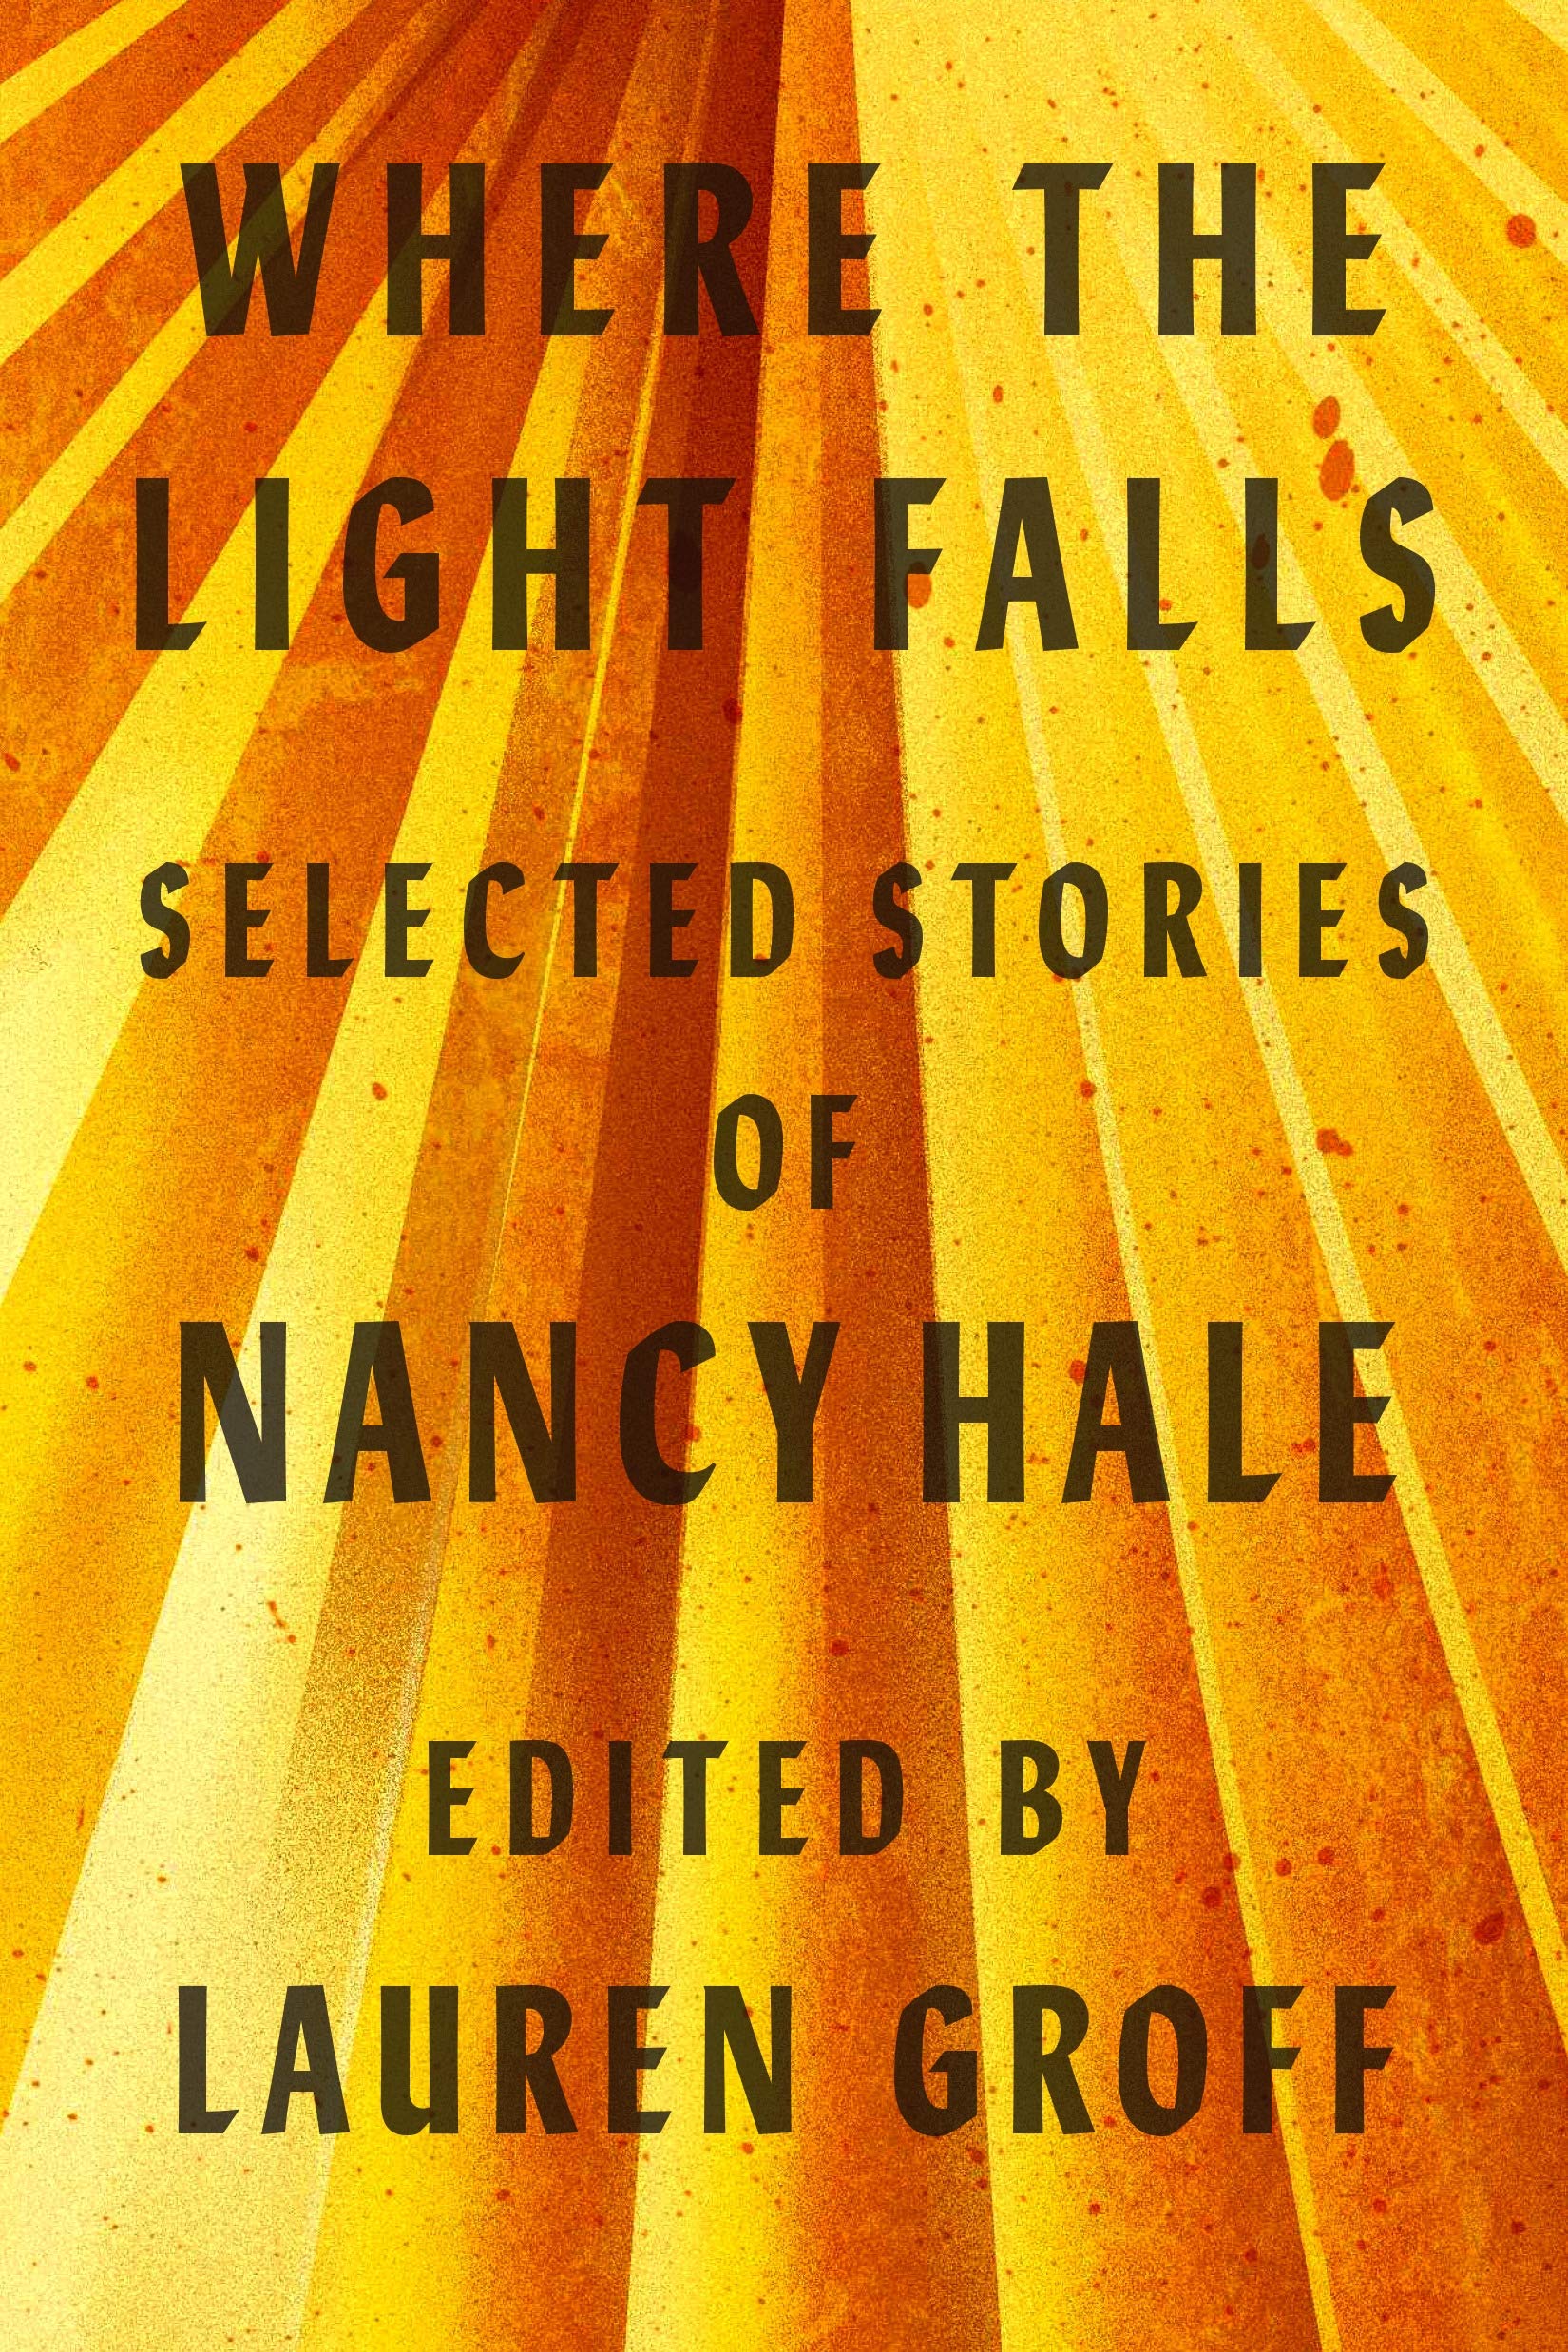 An abstract book cover design with warm shades of orange and yellow, featuring radiant beams that converge towards the center, highlighting the title "where the light falls" and the names "nancy hale" and "lauren groff.